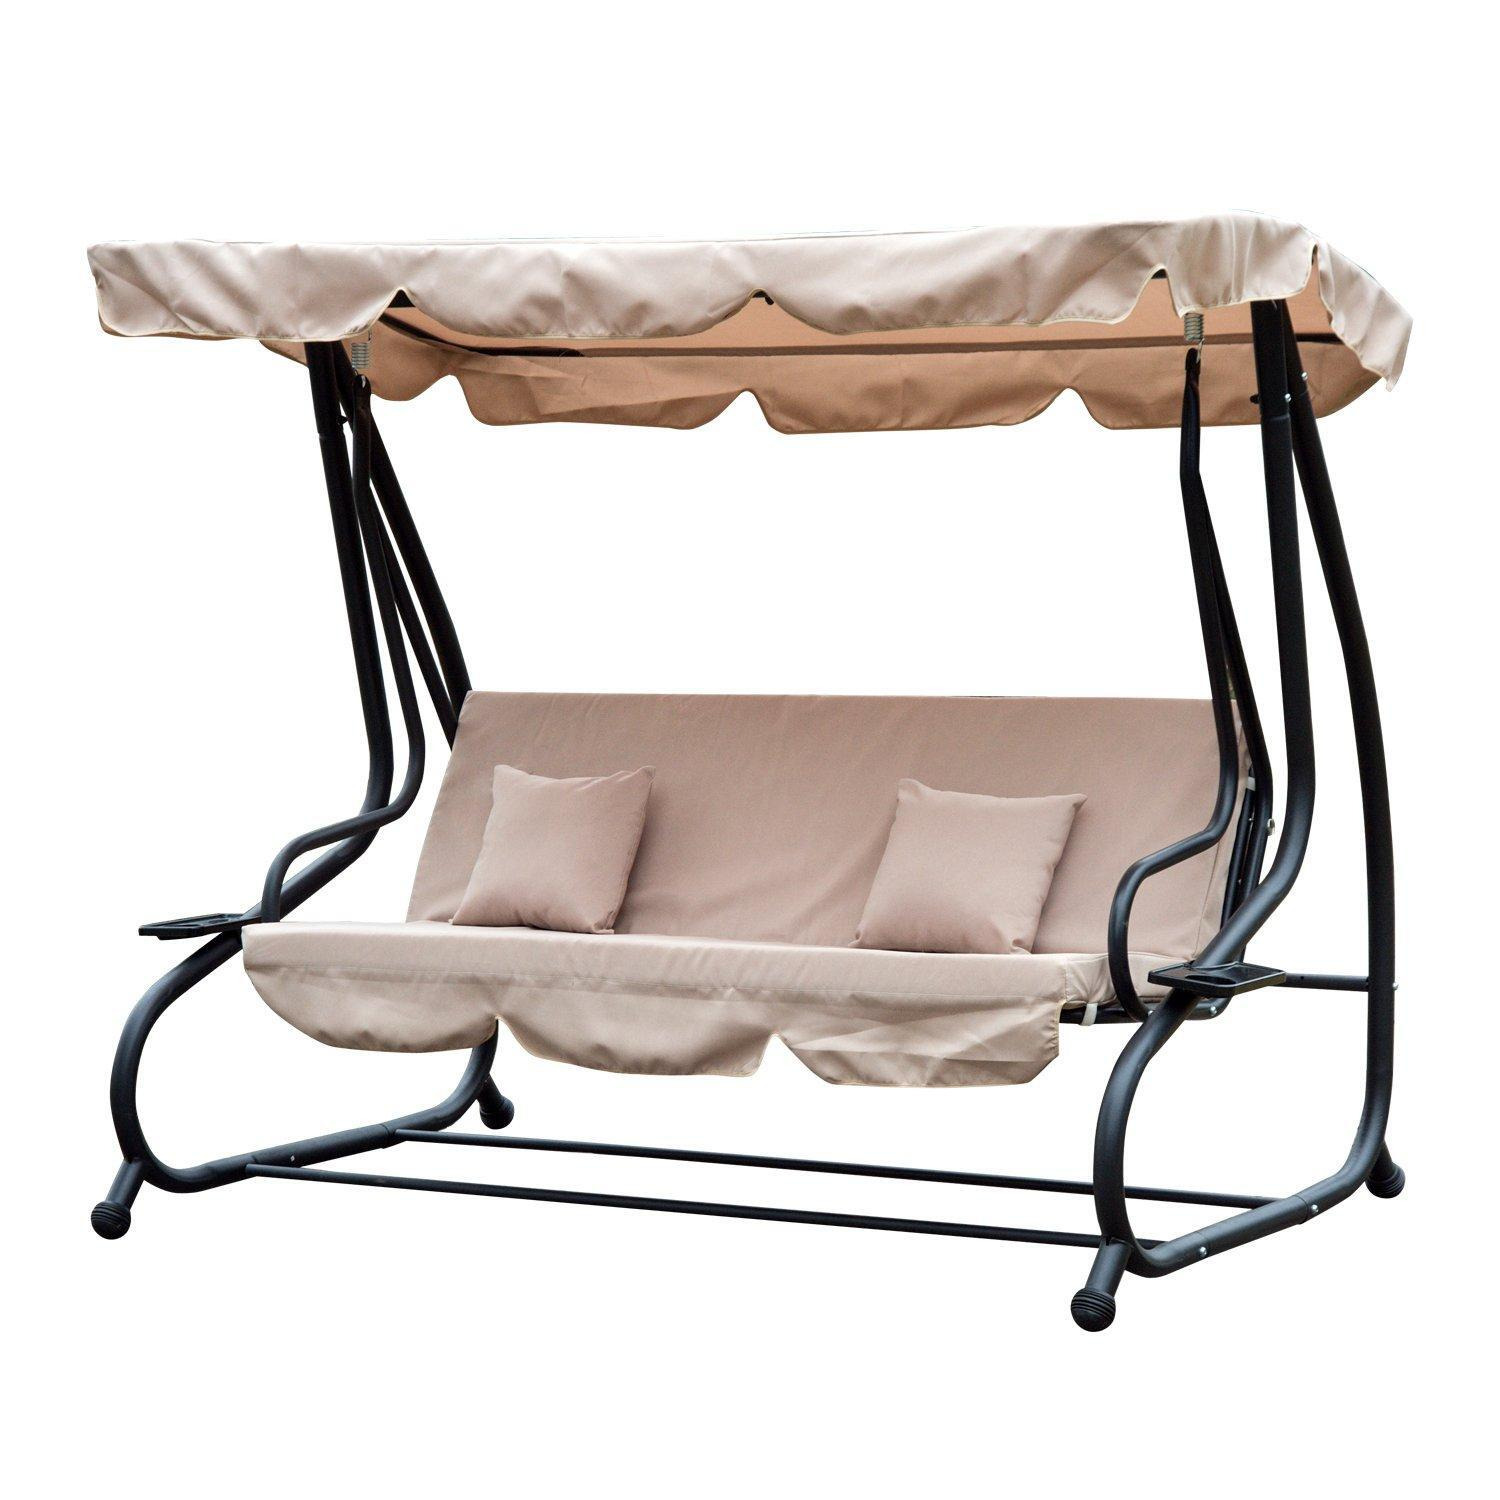 2-in-1 Garden Swing Chair for 3 Person with Adjustable Canopy - image 1